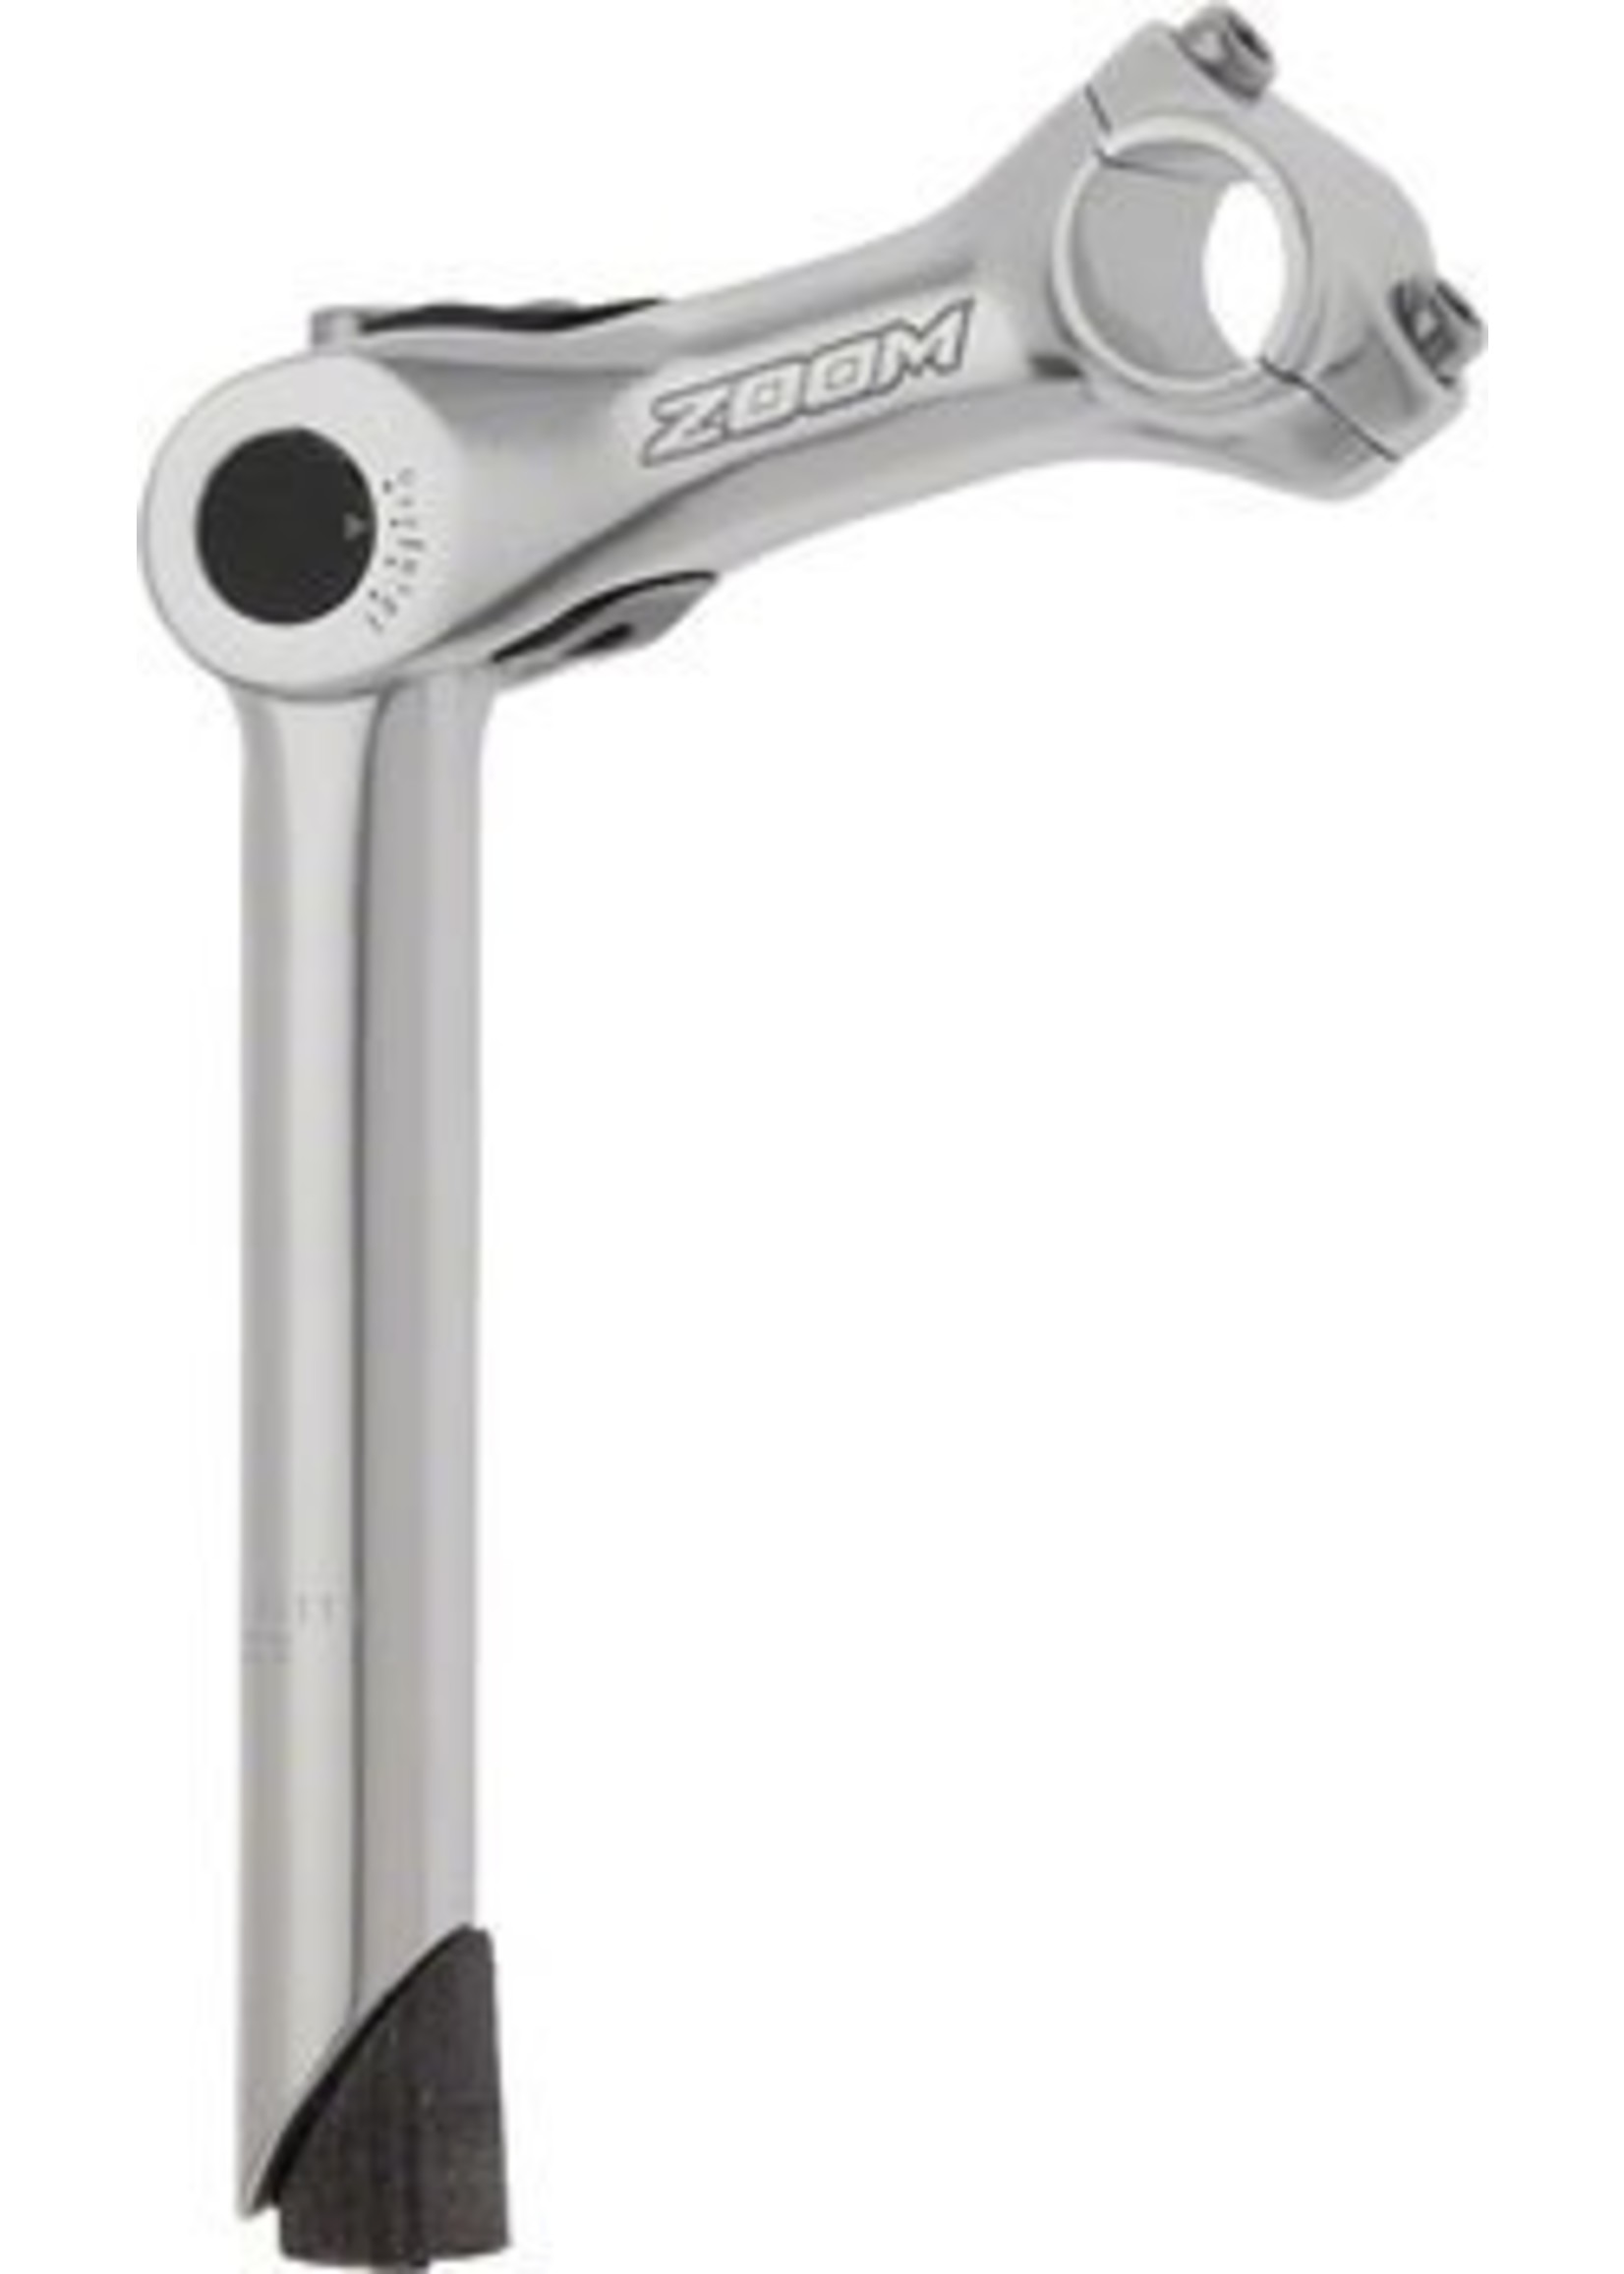 Zoom Quick Comfort Adjustable Stem Quill: 25.4mm Bar Clamp, 120mm Length, 80-150 degrees for 1-1/8" Steerer-tube, Silver